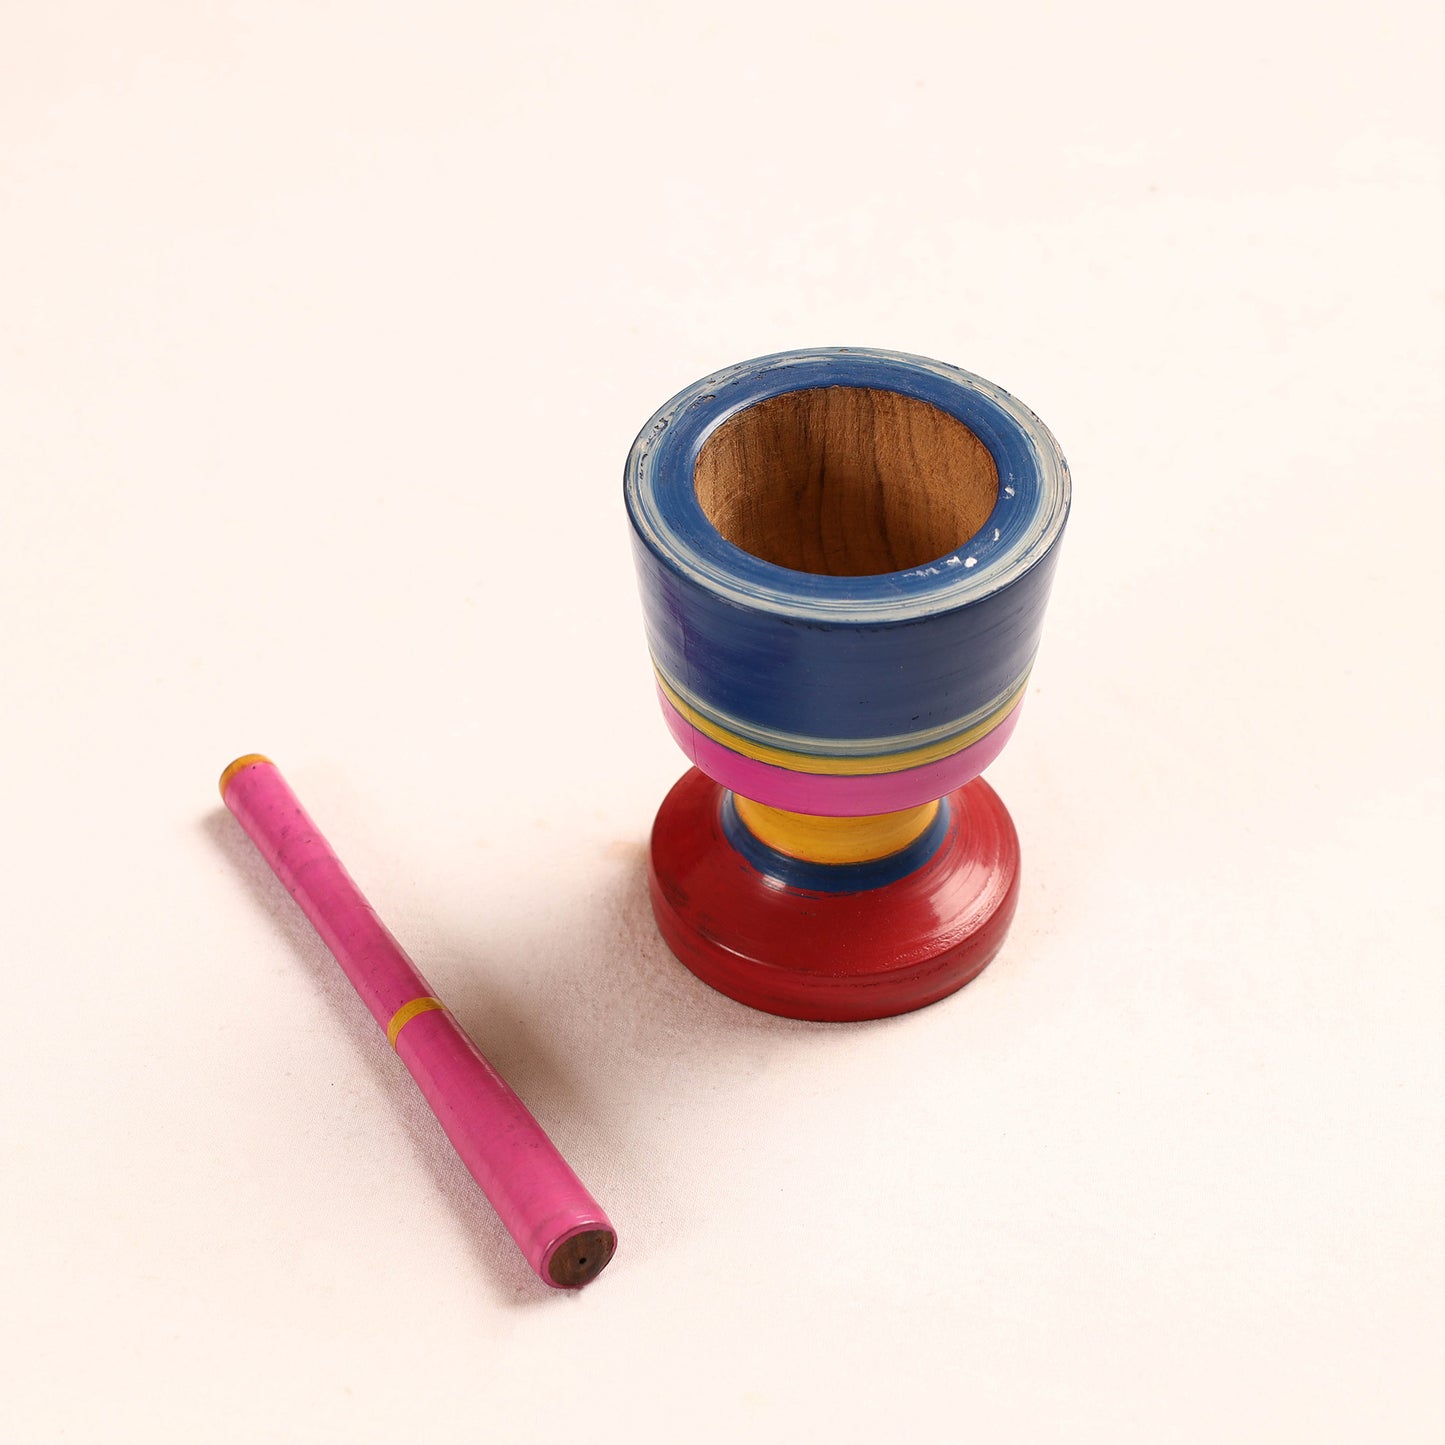  Wooden Mortar And Pestle
